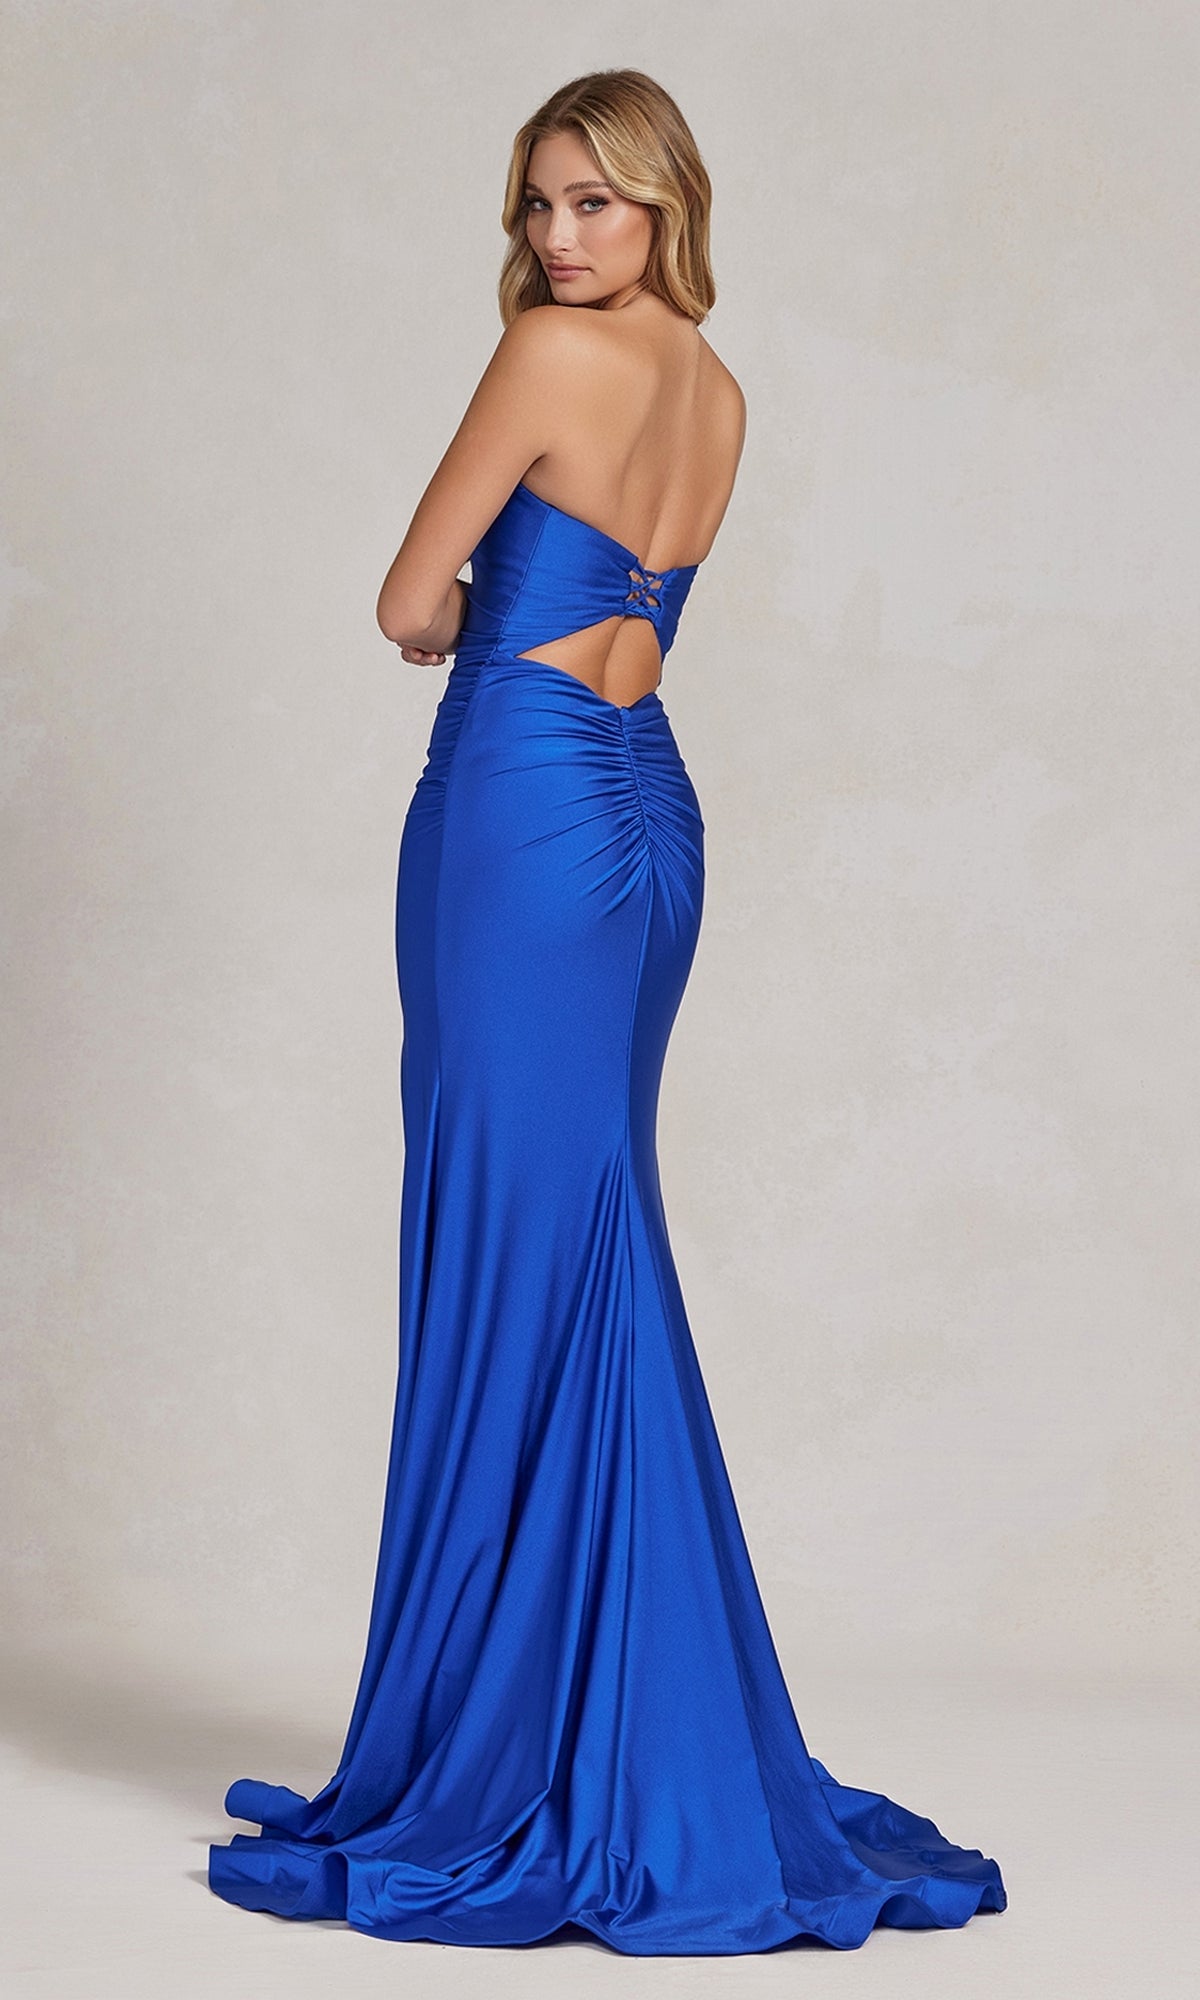 Buy From Navy Blue Simple Satin Off the Shoulder Bridesmaid Dress 2020